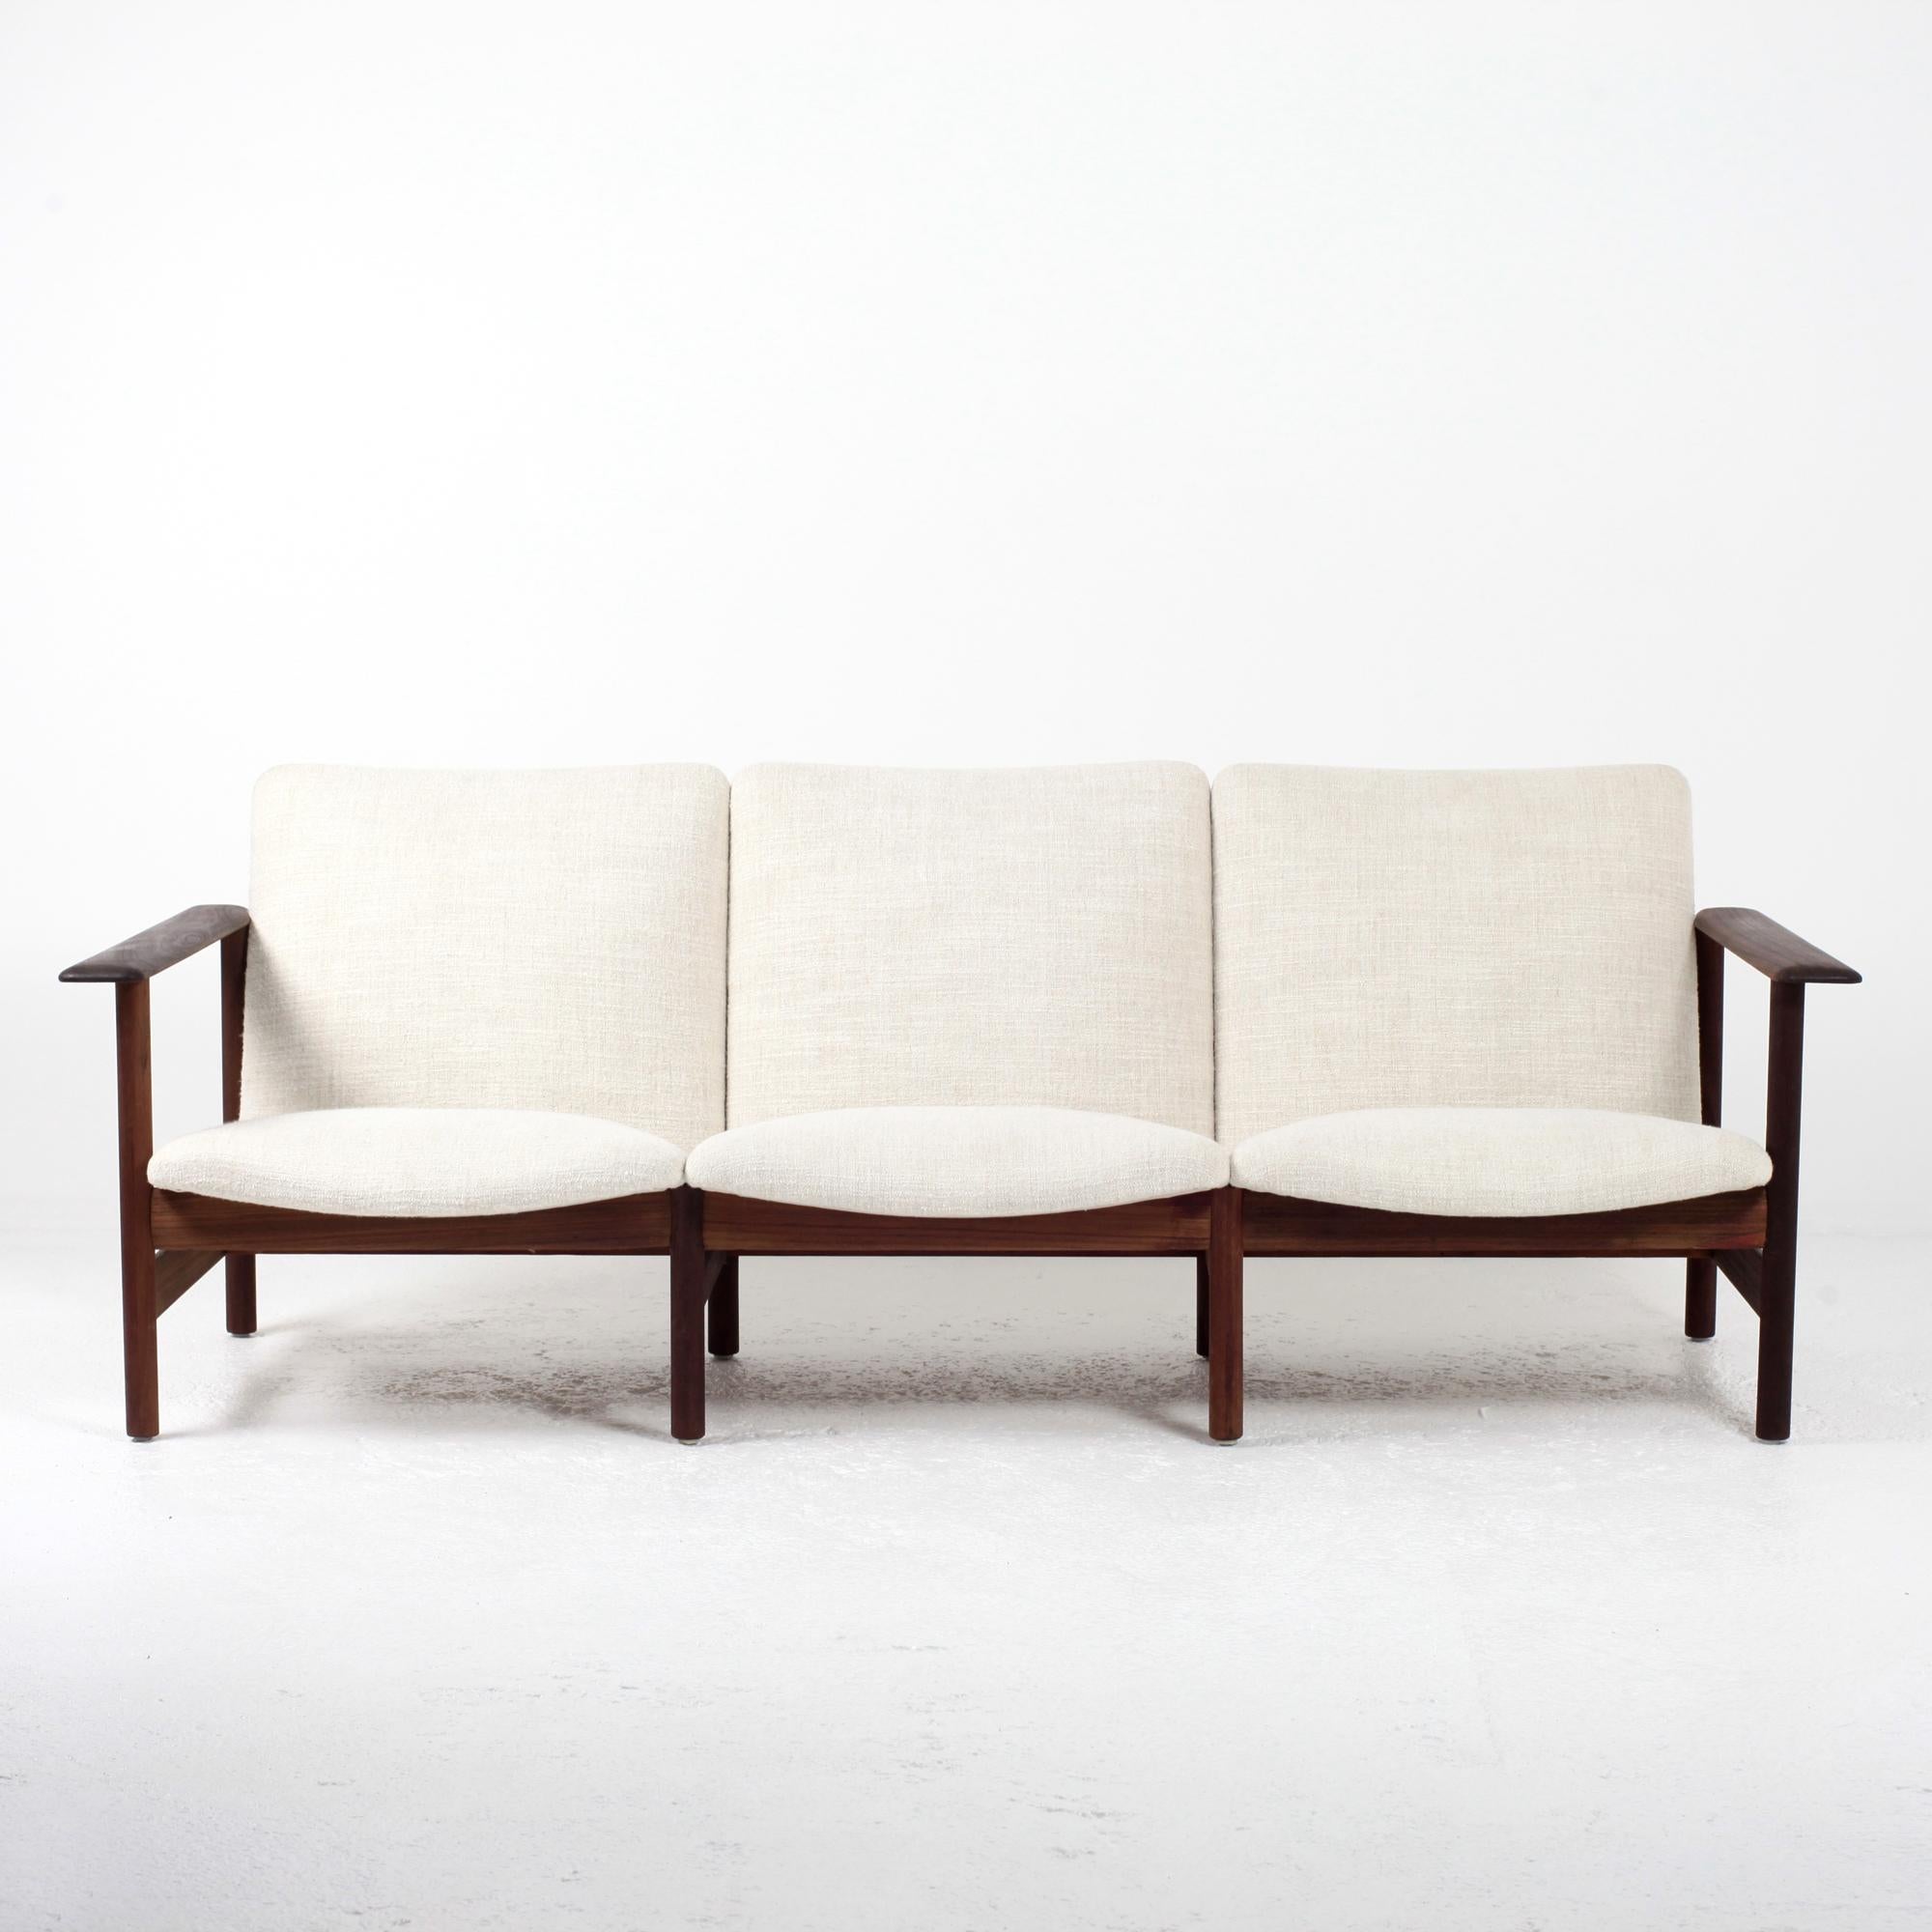 An extraordinary midcentury sofa from the 1960s manufactured by Sièges Steiner. With a solid wood frame, the sofa has been professionally reupholstered in a new very soft cream/beige fabric from the house of Pierre Frey. This modern vintage sofa is